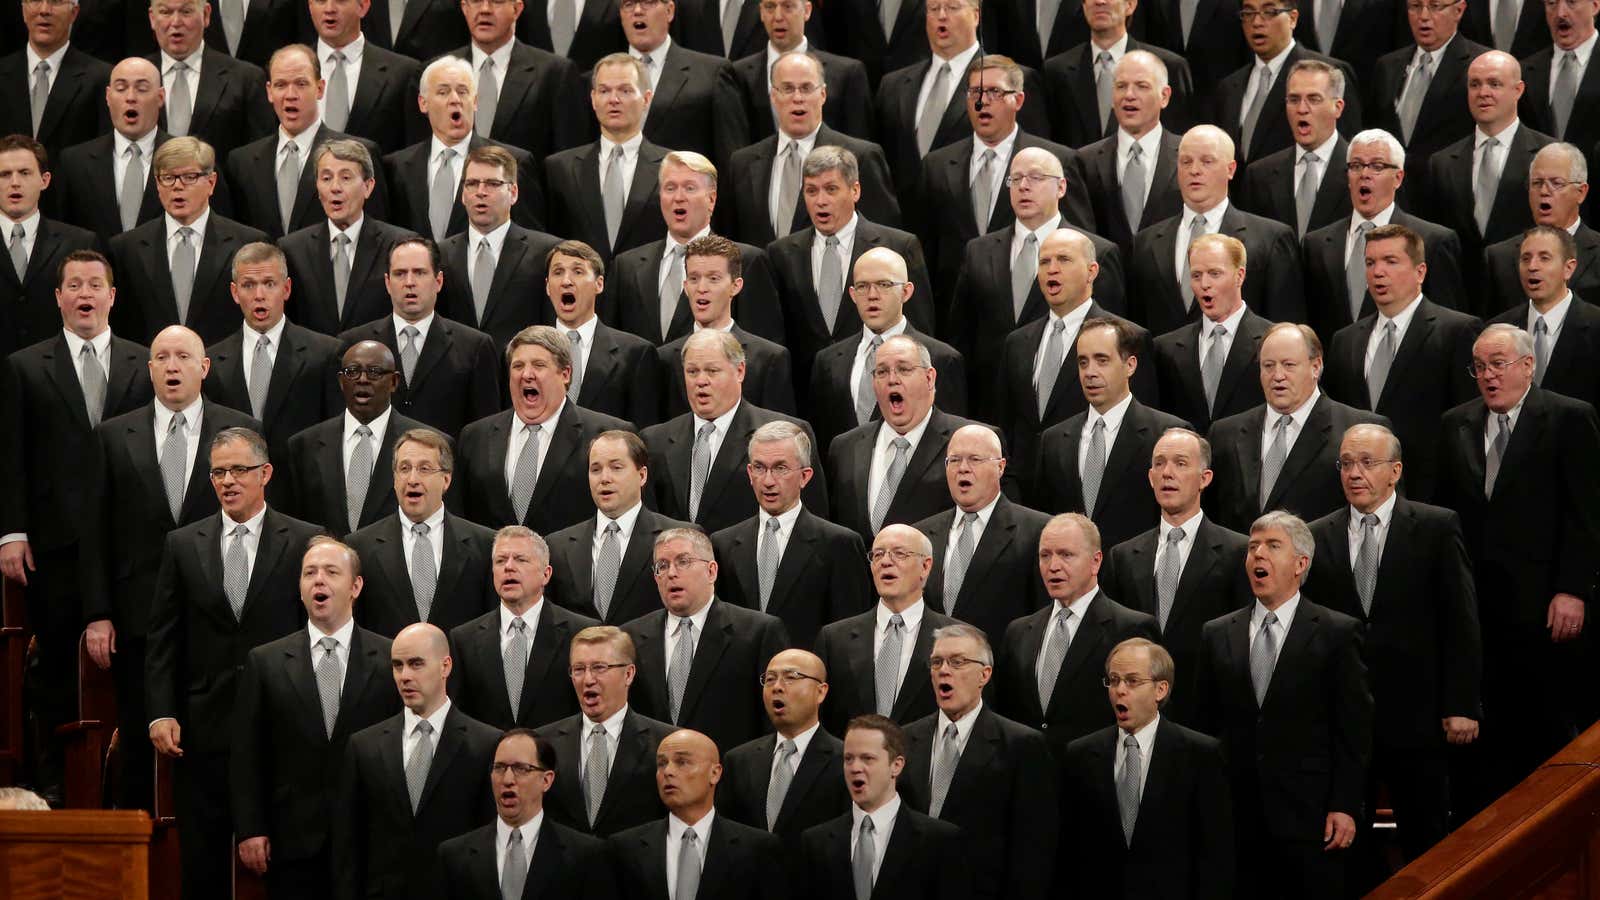 The Mormon Tabernacle Choir—which will perform at Trump’s inauguration—sings in Salt Lake City.